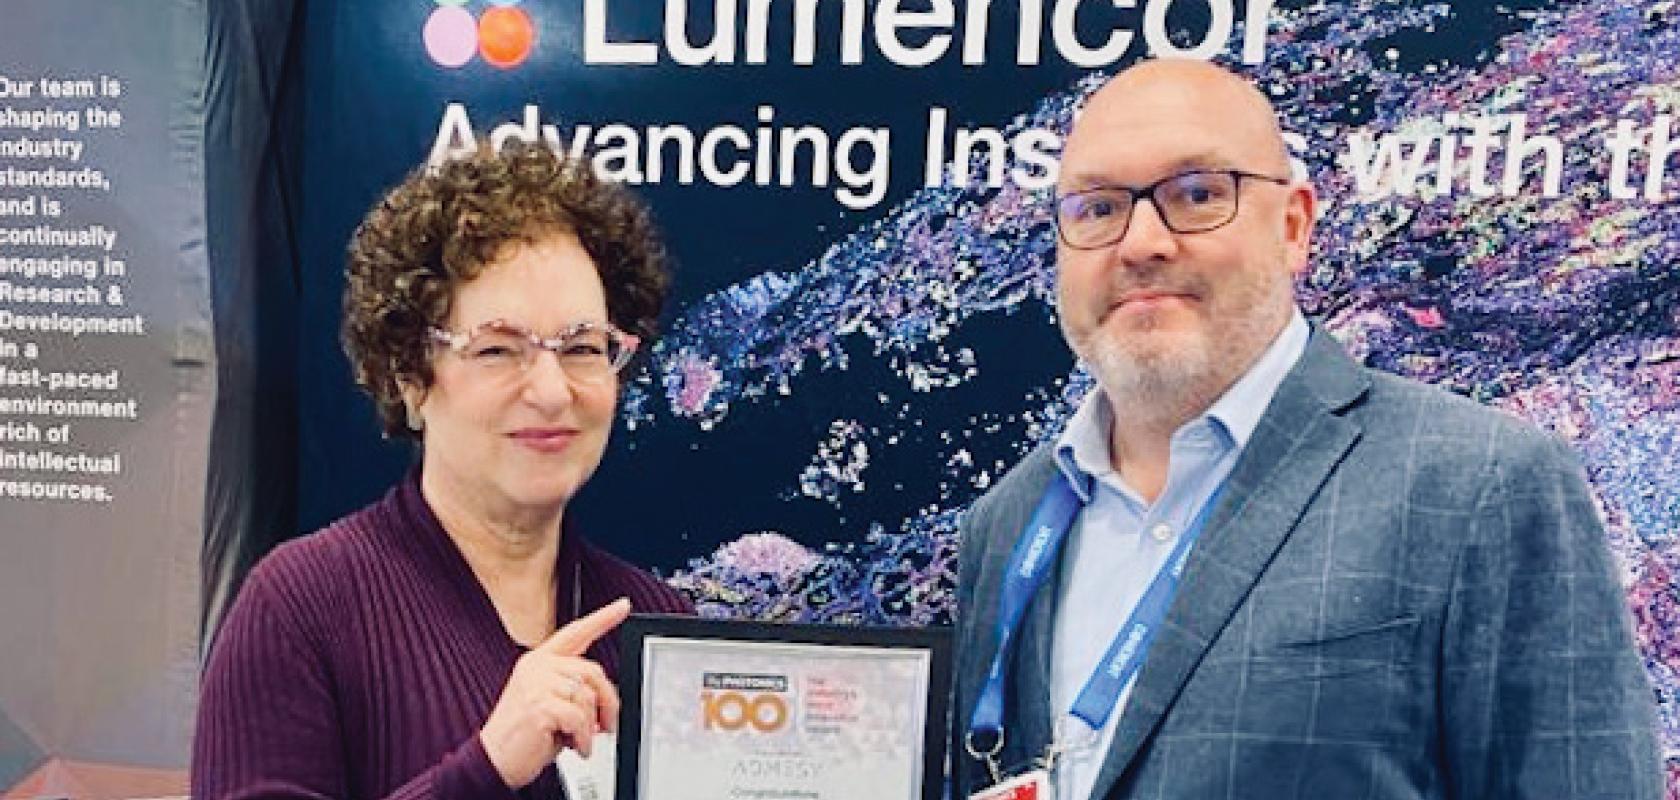 Lumencor Chief Commercial Officer Claudia Jaffe receives her Photonics100 certificate from Europa Science’s Mark Elliott at Photonics West 2023